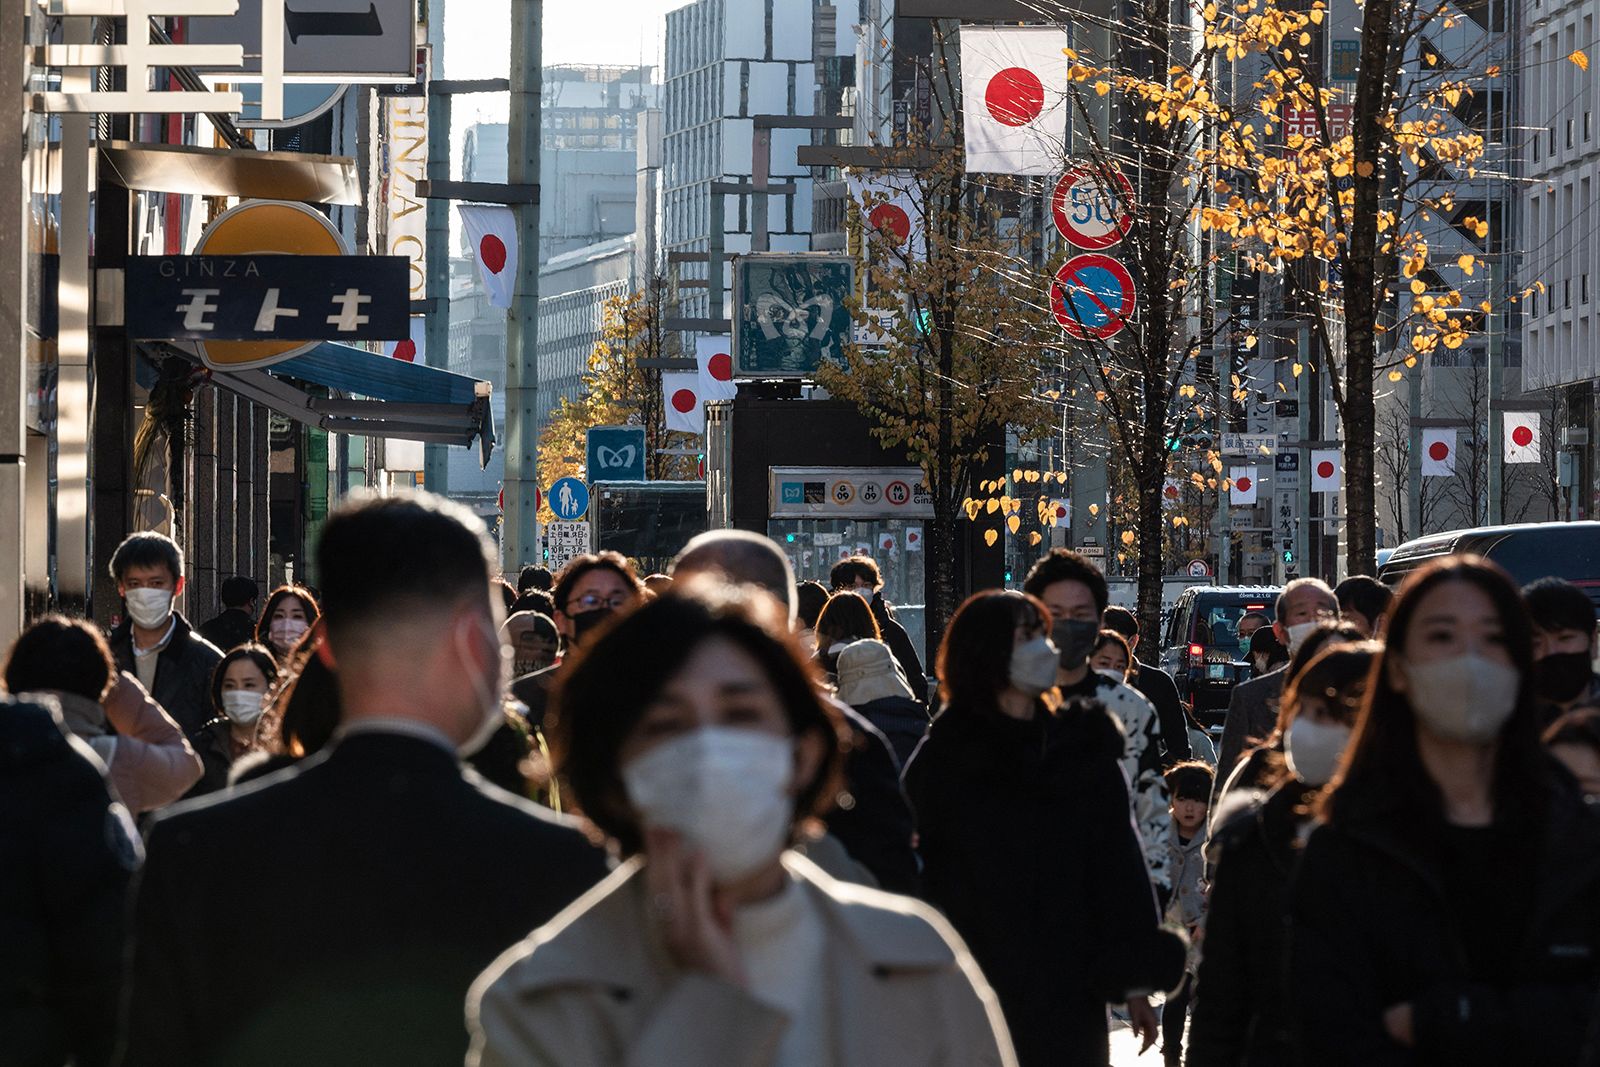 Tokyo's population sees y-o-y drop for first time in over 24 years (due to  shrinking foreigner population) – JAPAN PROPERTY CENTRAL K.K.